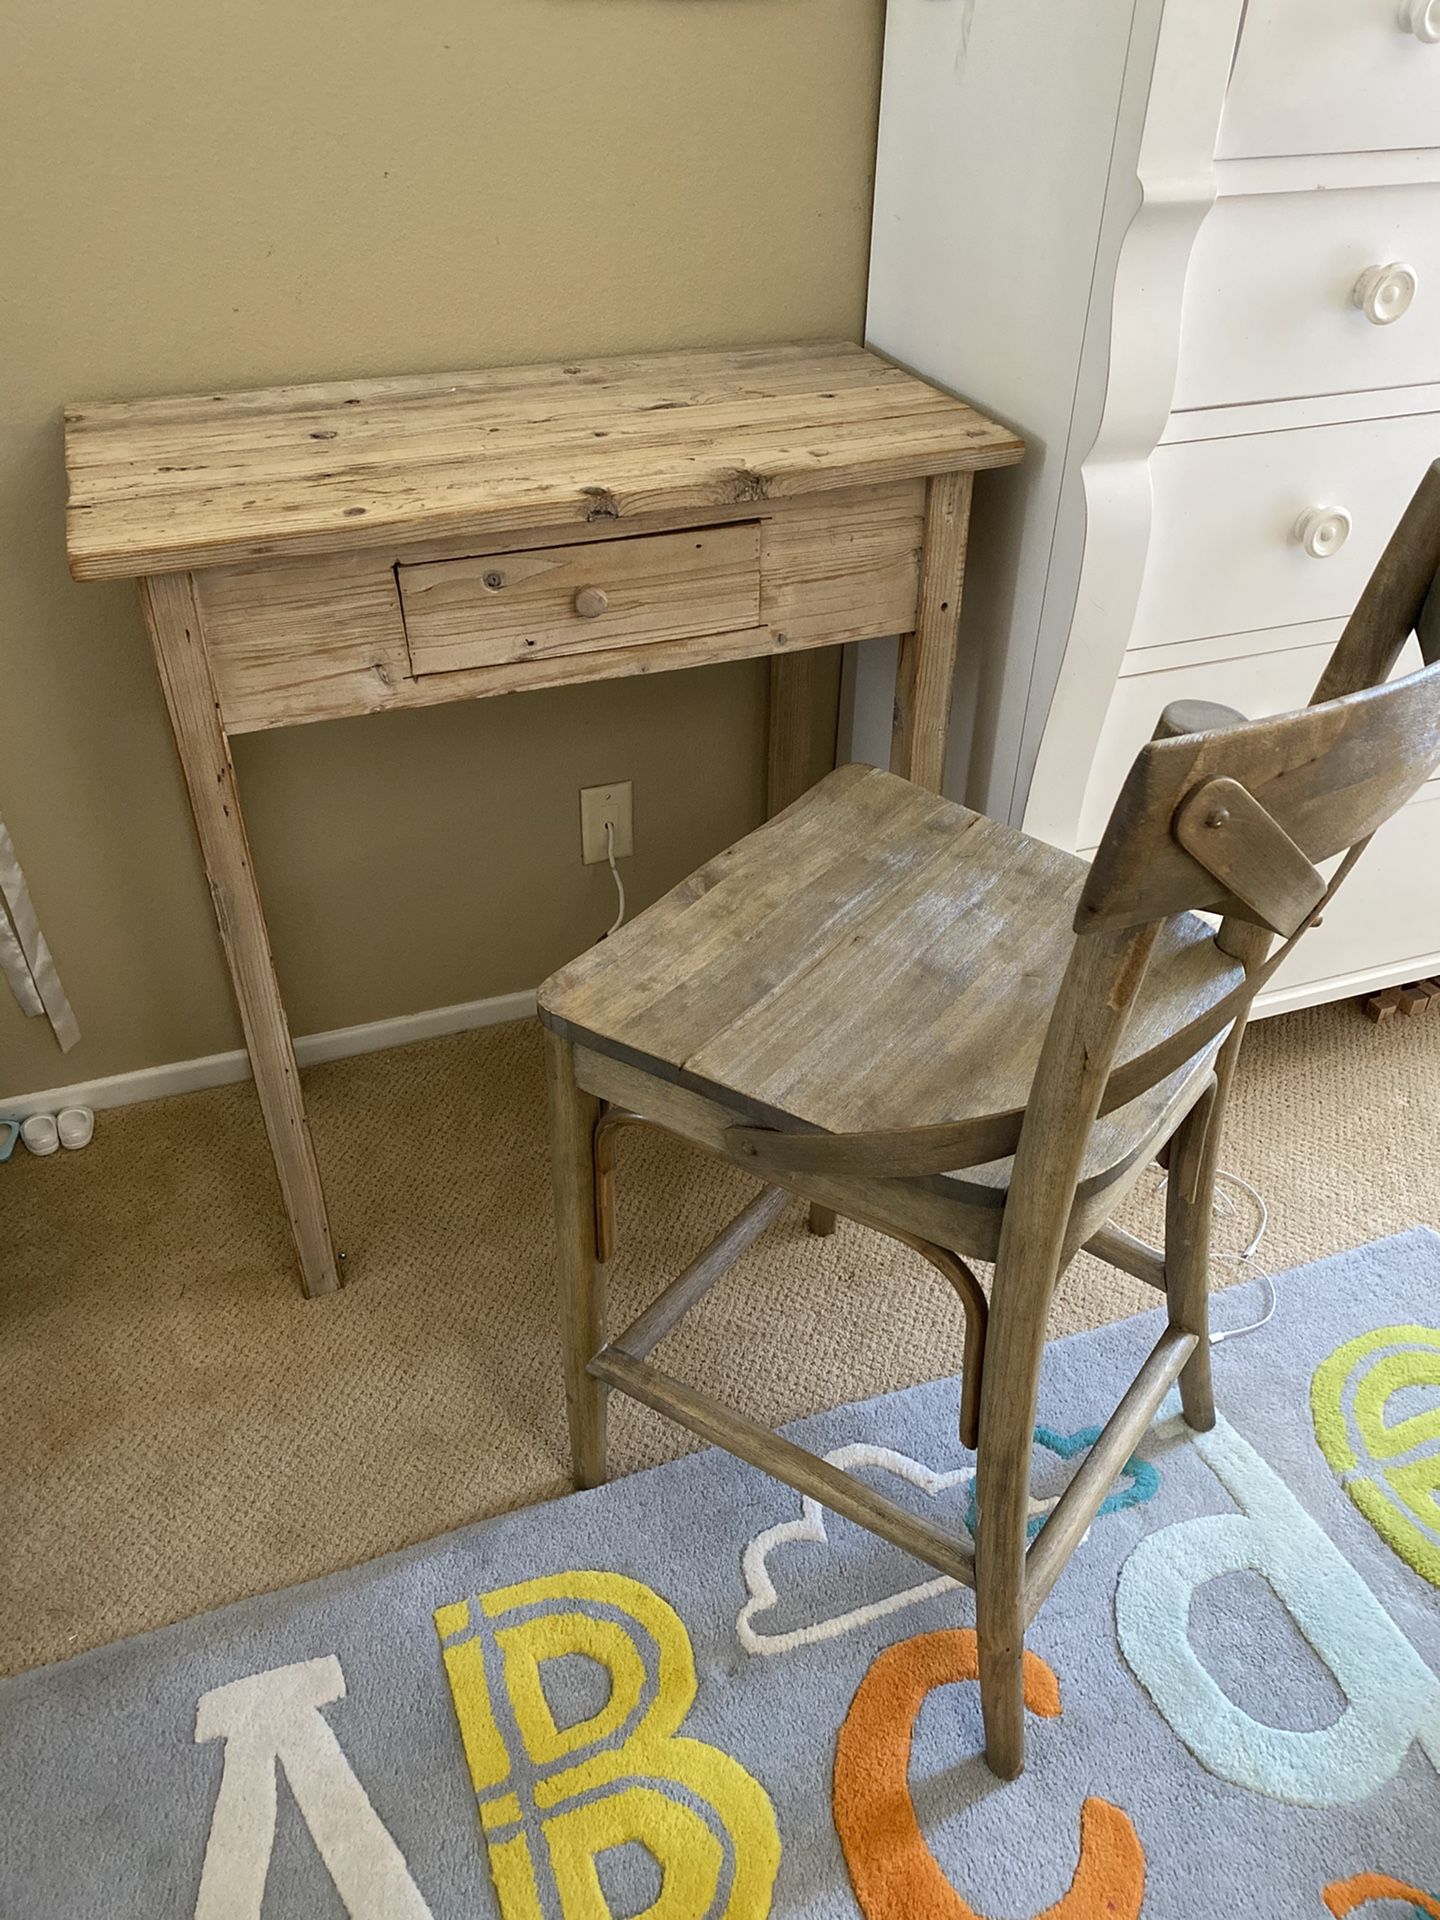 Small desk with chair